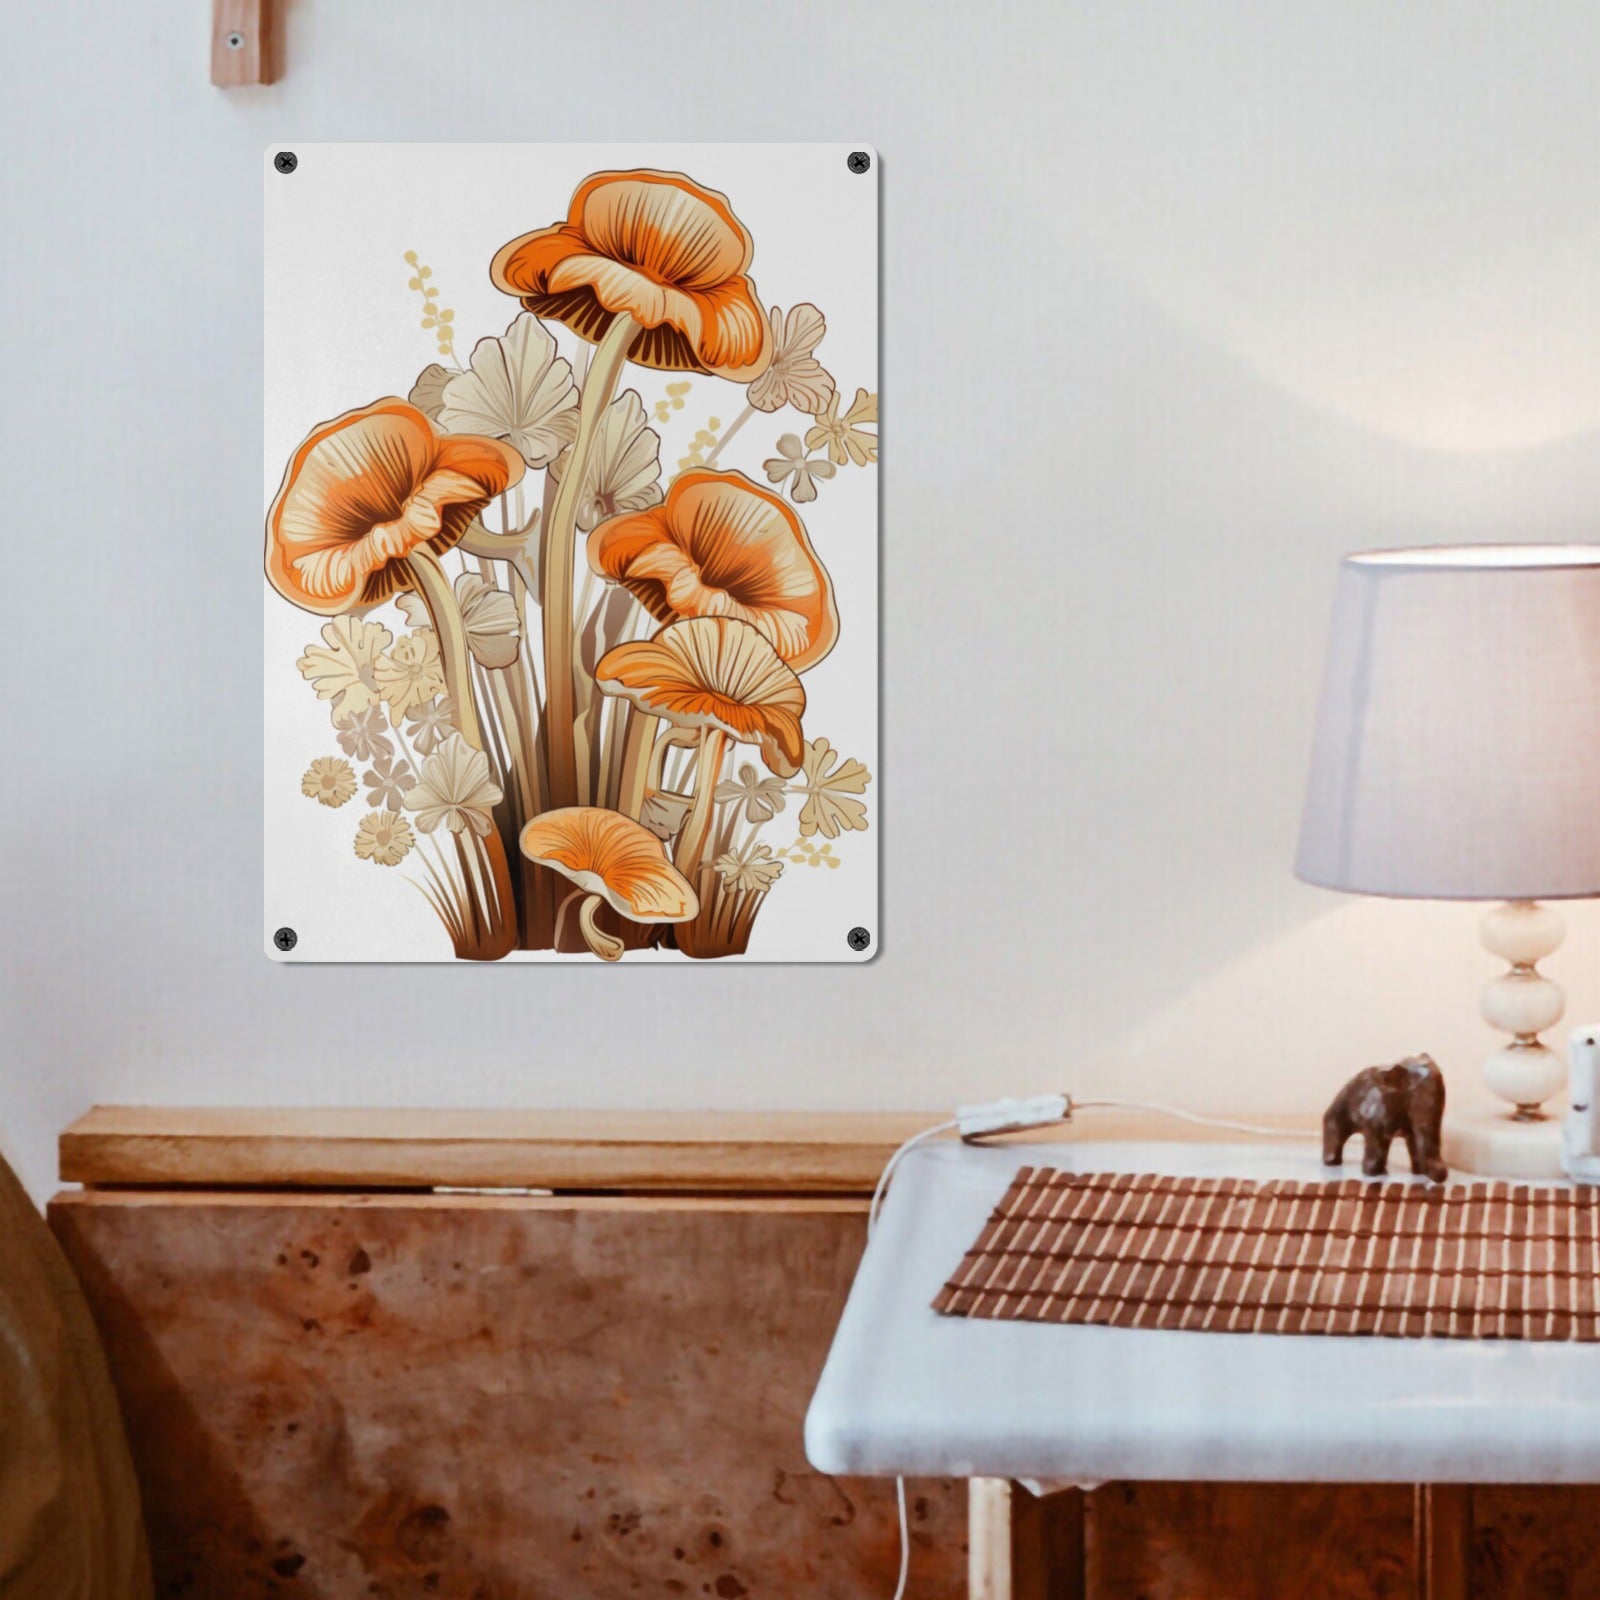 Whimsical Fantasy Fairycore Home Decor Wall Art Poster Mushrooms Sign Indoor / Outdoor Metal Tin Sign 12"x16"